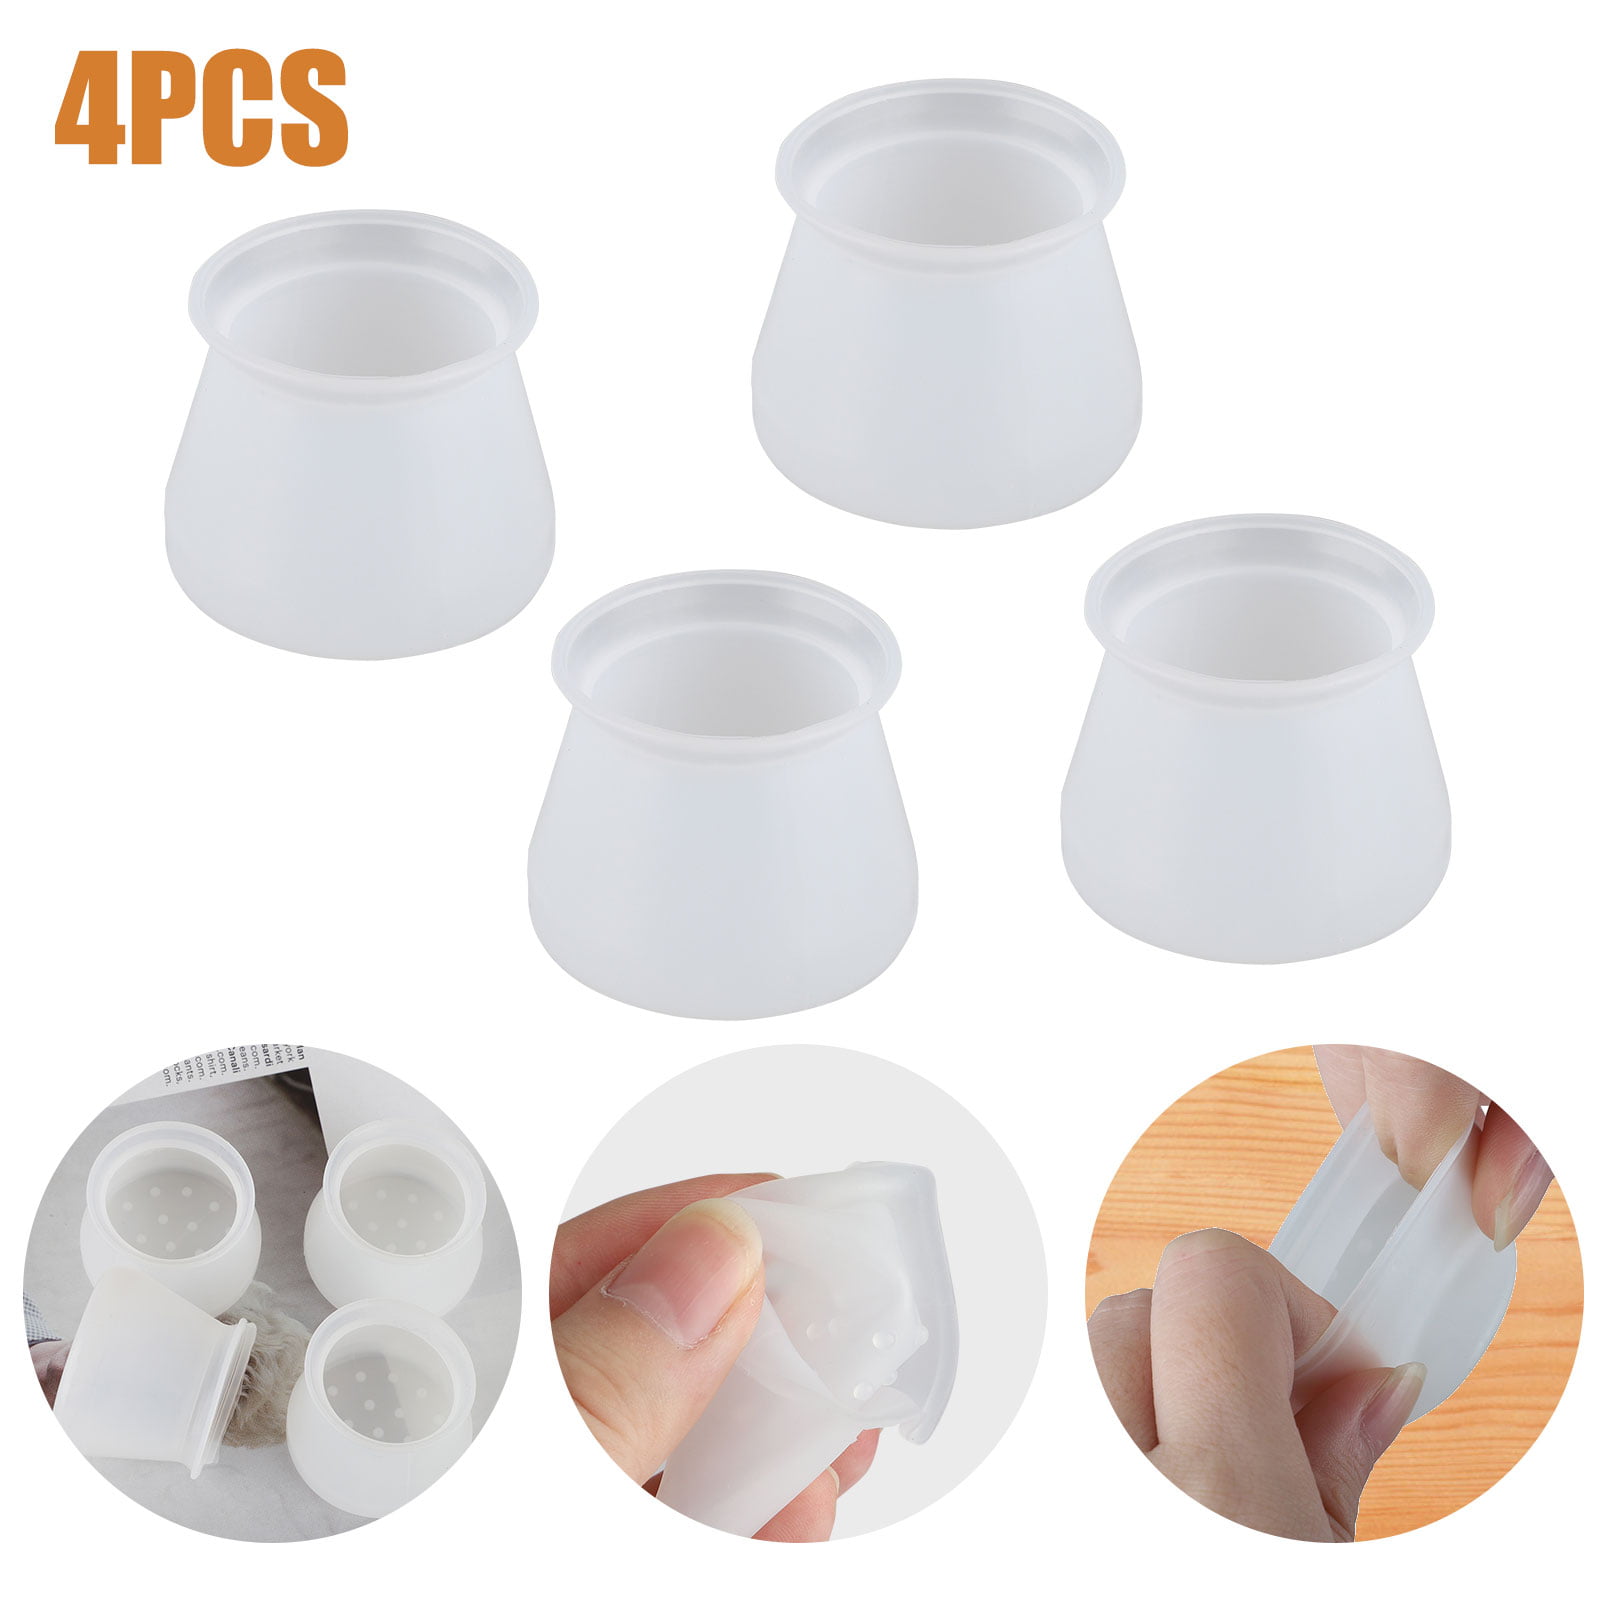 White Intsun Elastic Chair Legs Cups Protection Cover Round Chair Leg Floor Protectors Anti-Slip Bottom Table Feet Pads Prevents Scratches and Noise 40Pcs Silicone Furniture Leg Caps with Felt Pad